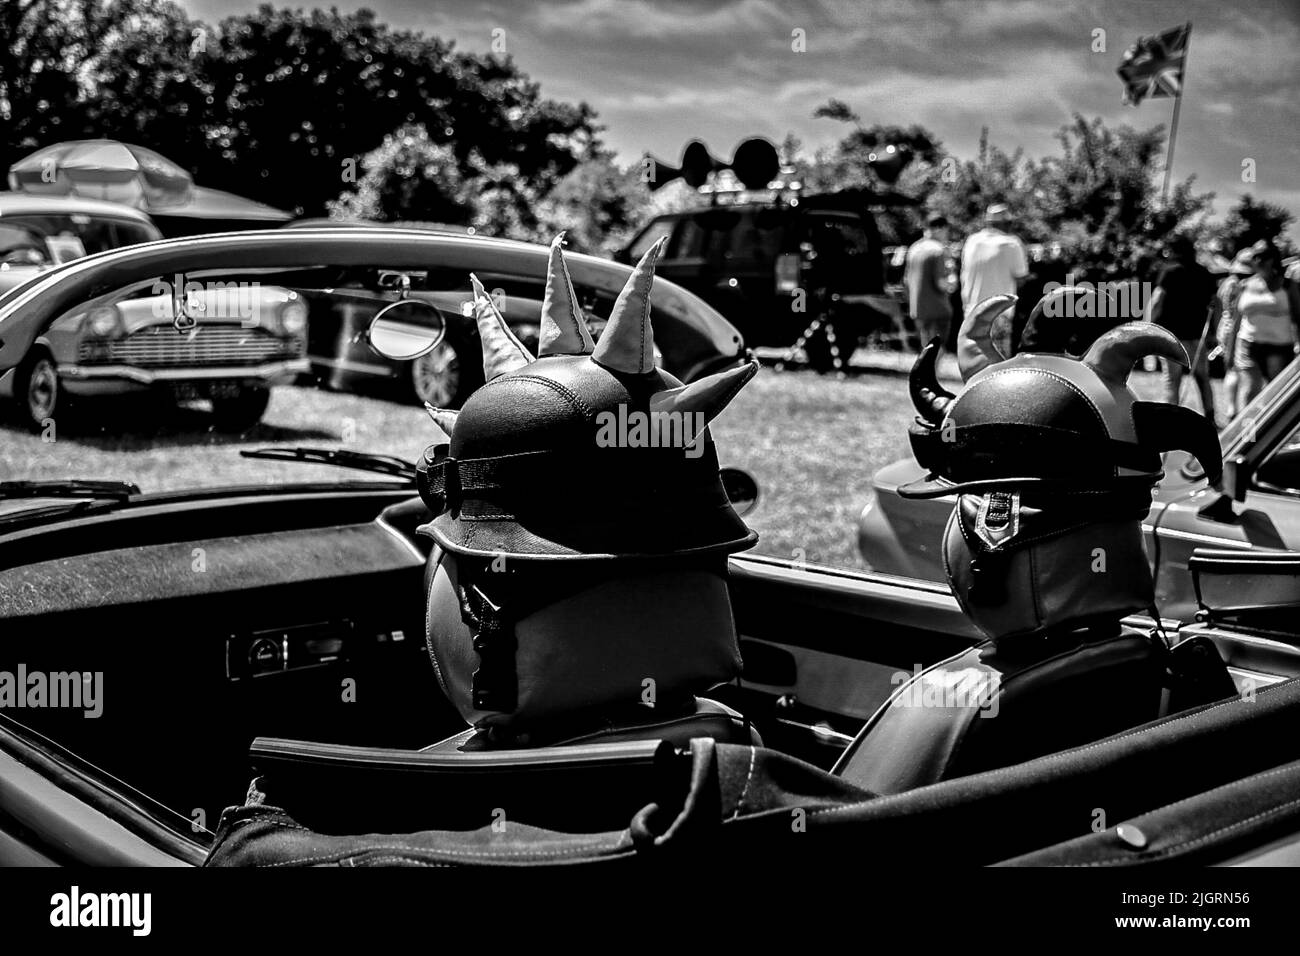 A grayscale of a  classic vintage car with two mohawk helmets attached to its seats Stock Photo